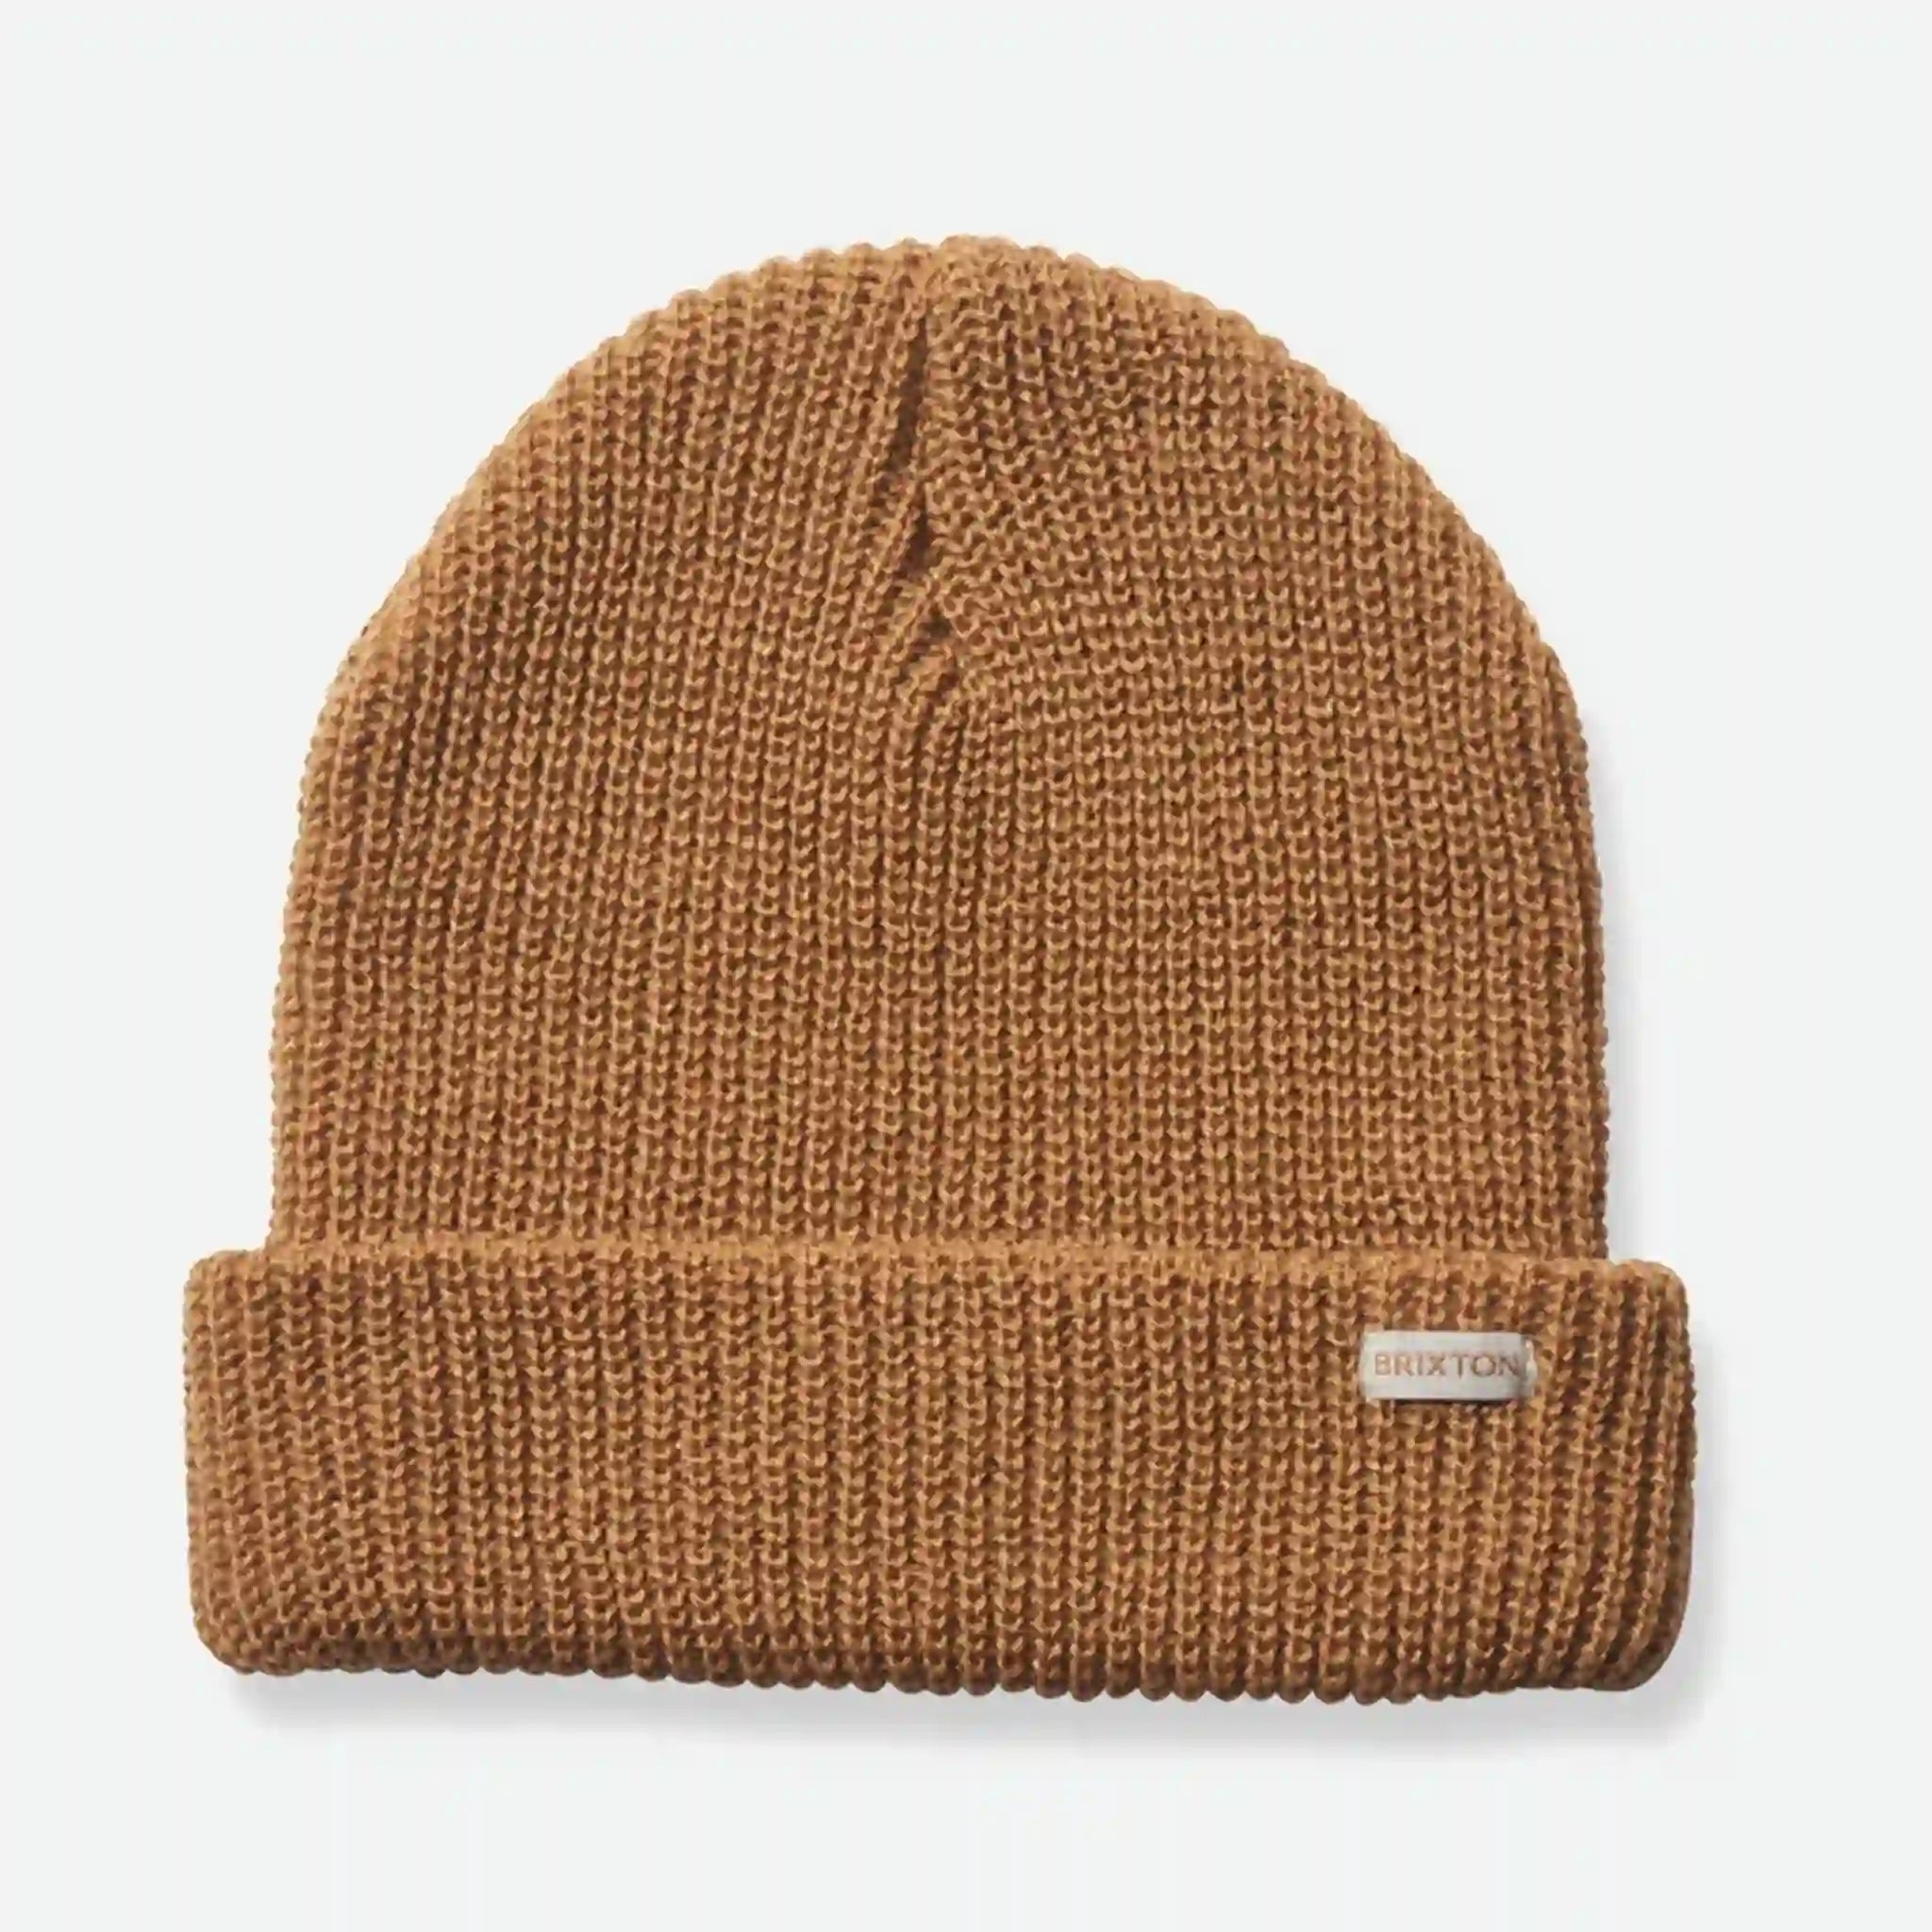 A tan ribbed beanie with a small rectangle label on the right corner that reads, "Brixton" on a white background.